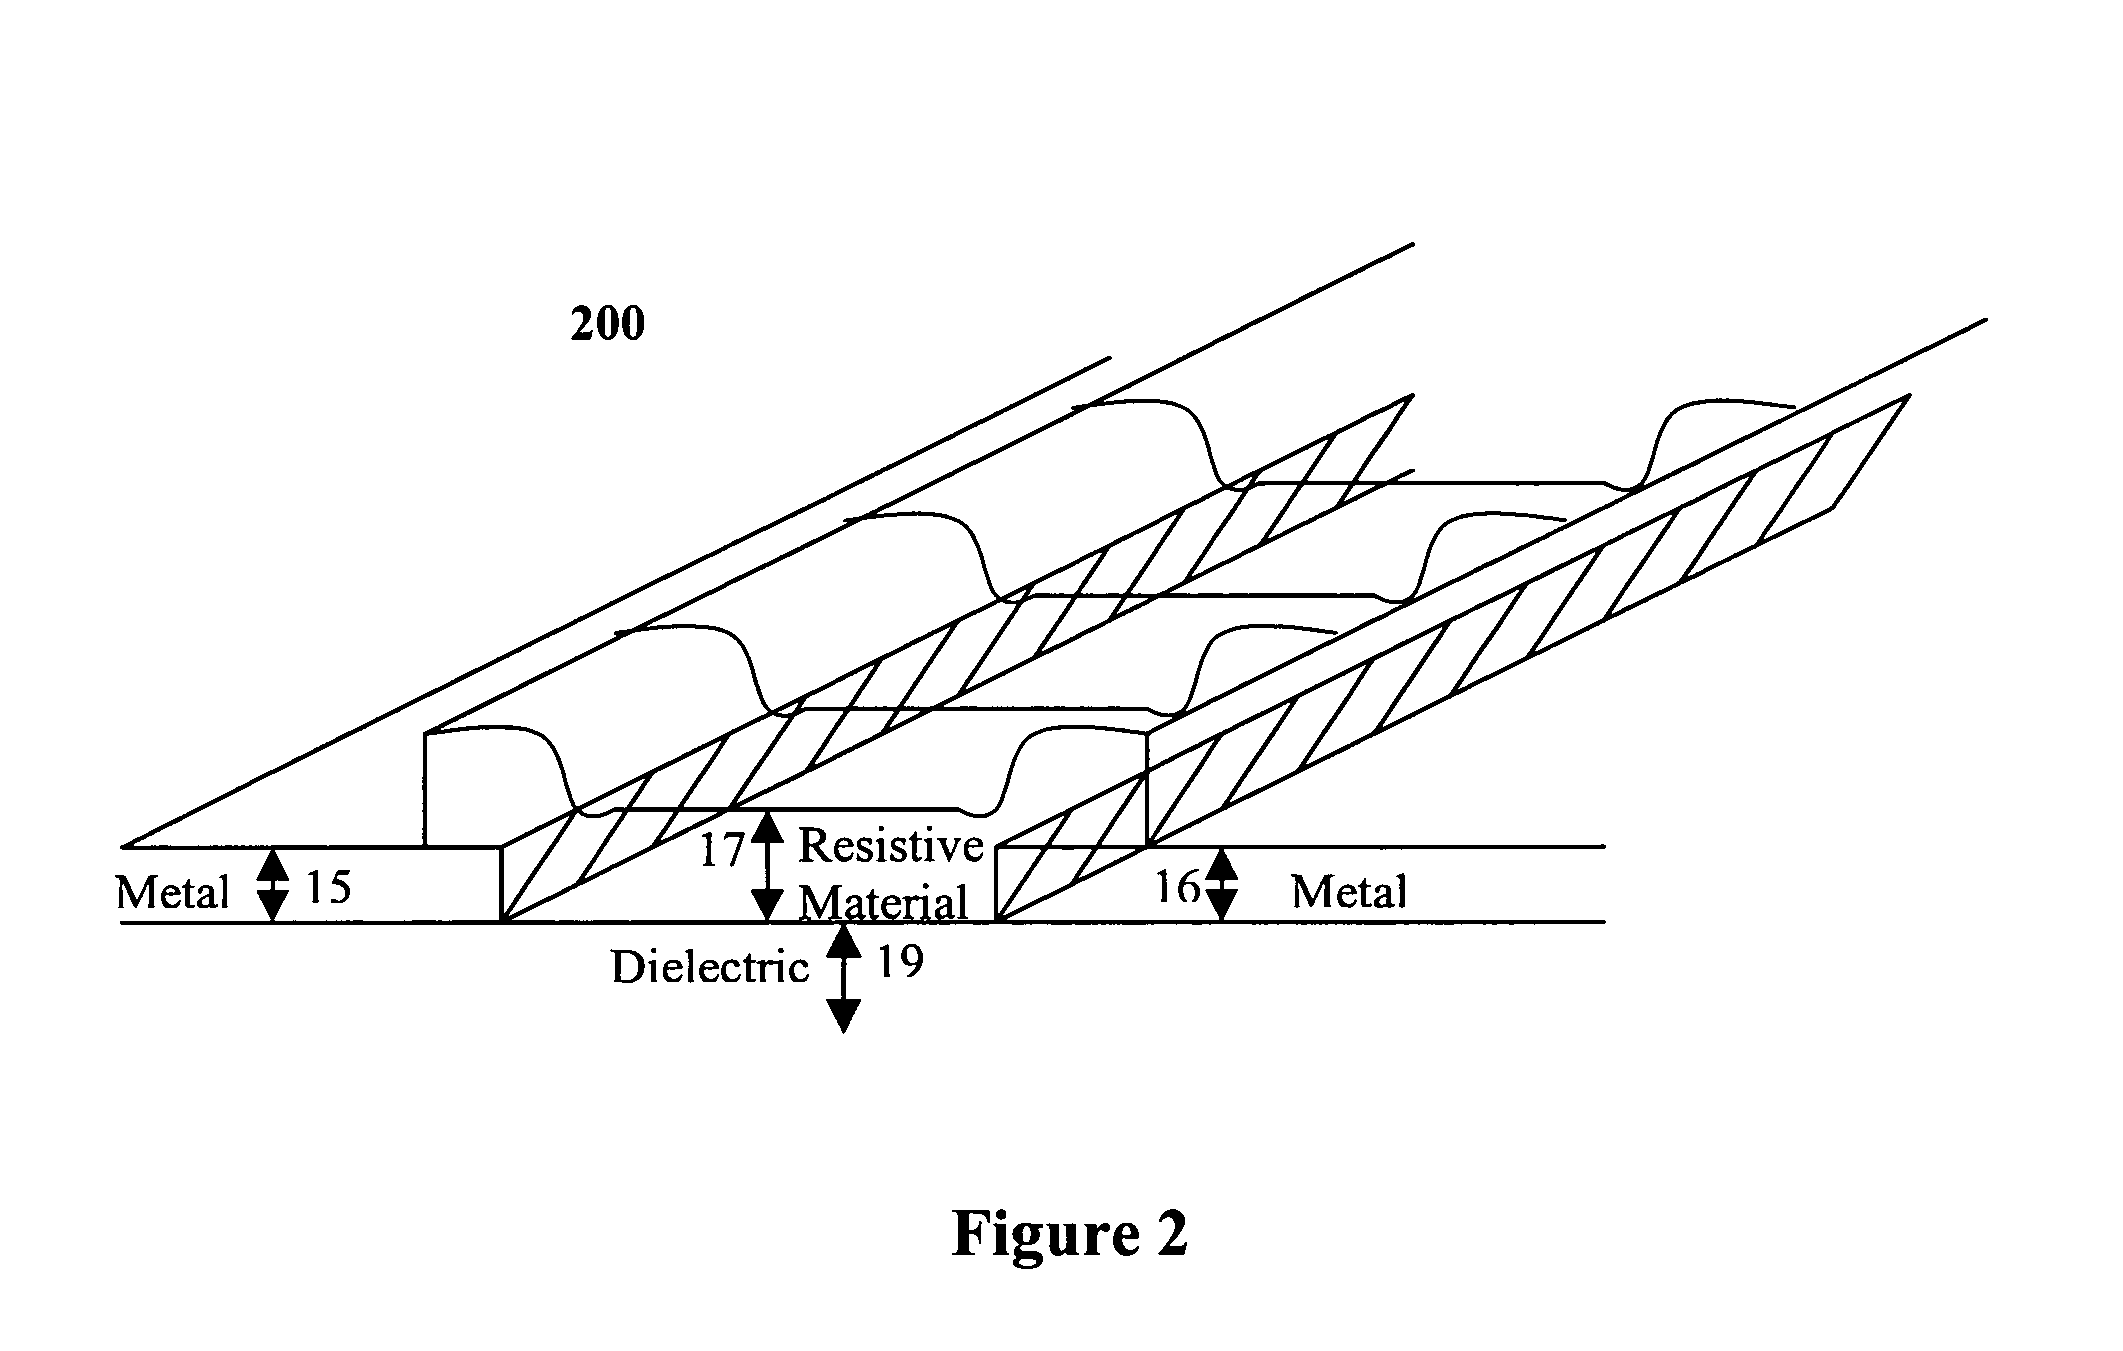 Method and system for reducing parasitic feedback and parasitic resonances in high-gain transimpedance amplifiers